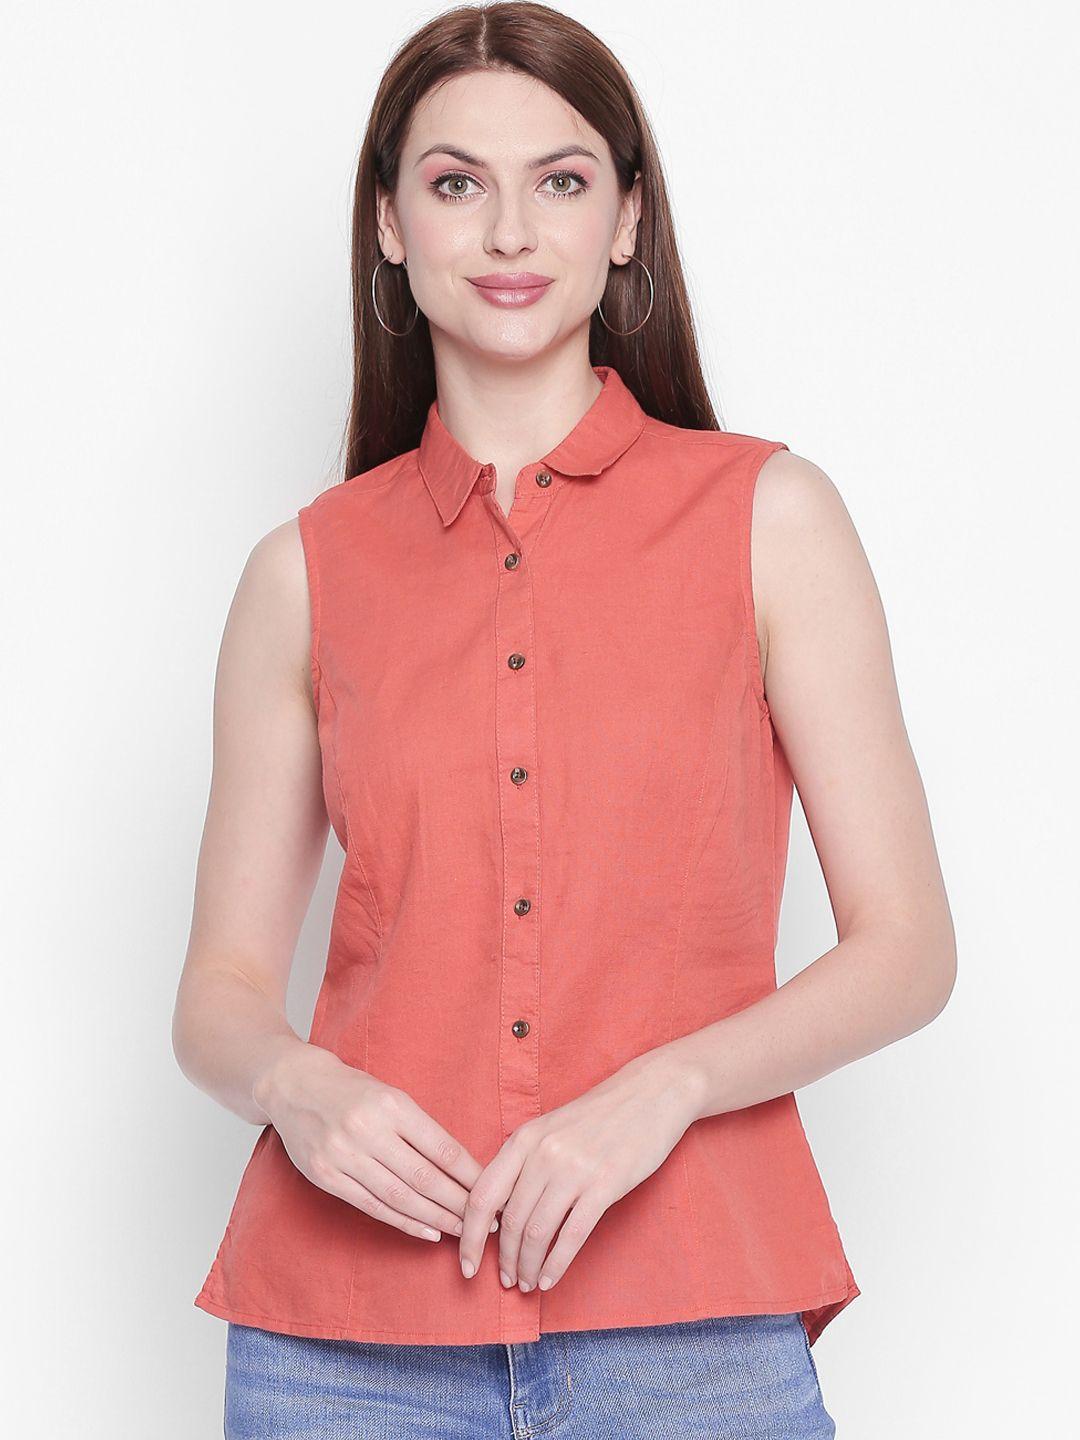 honey by pantaloons women coral pink solid shirt style top